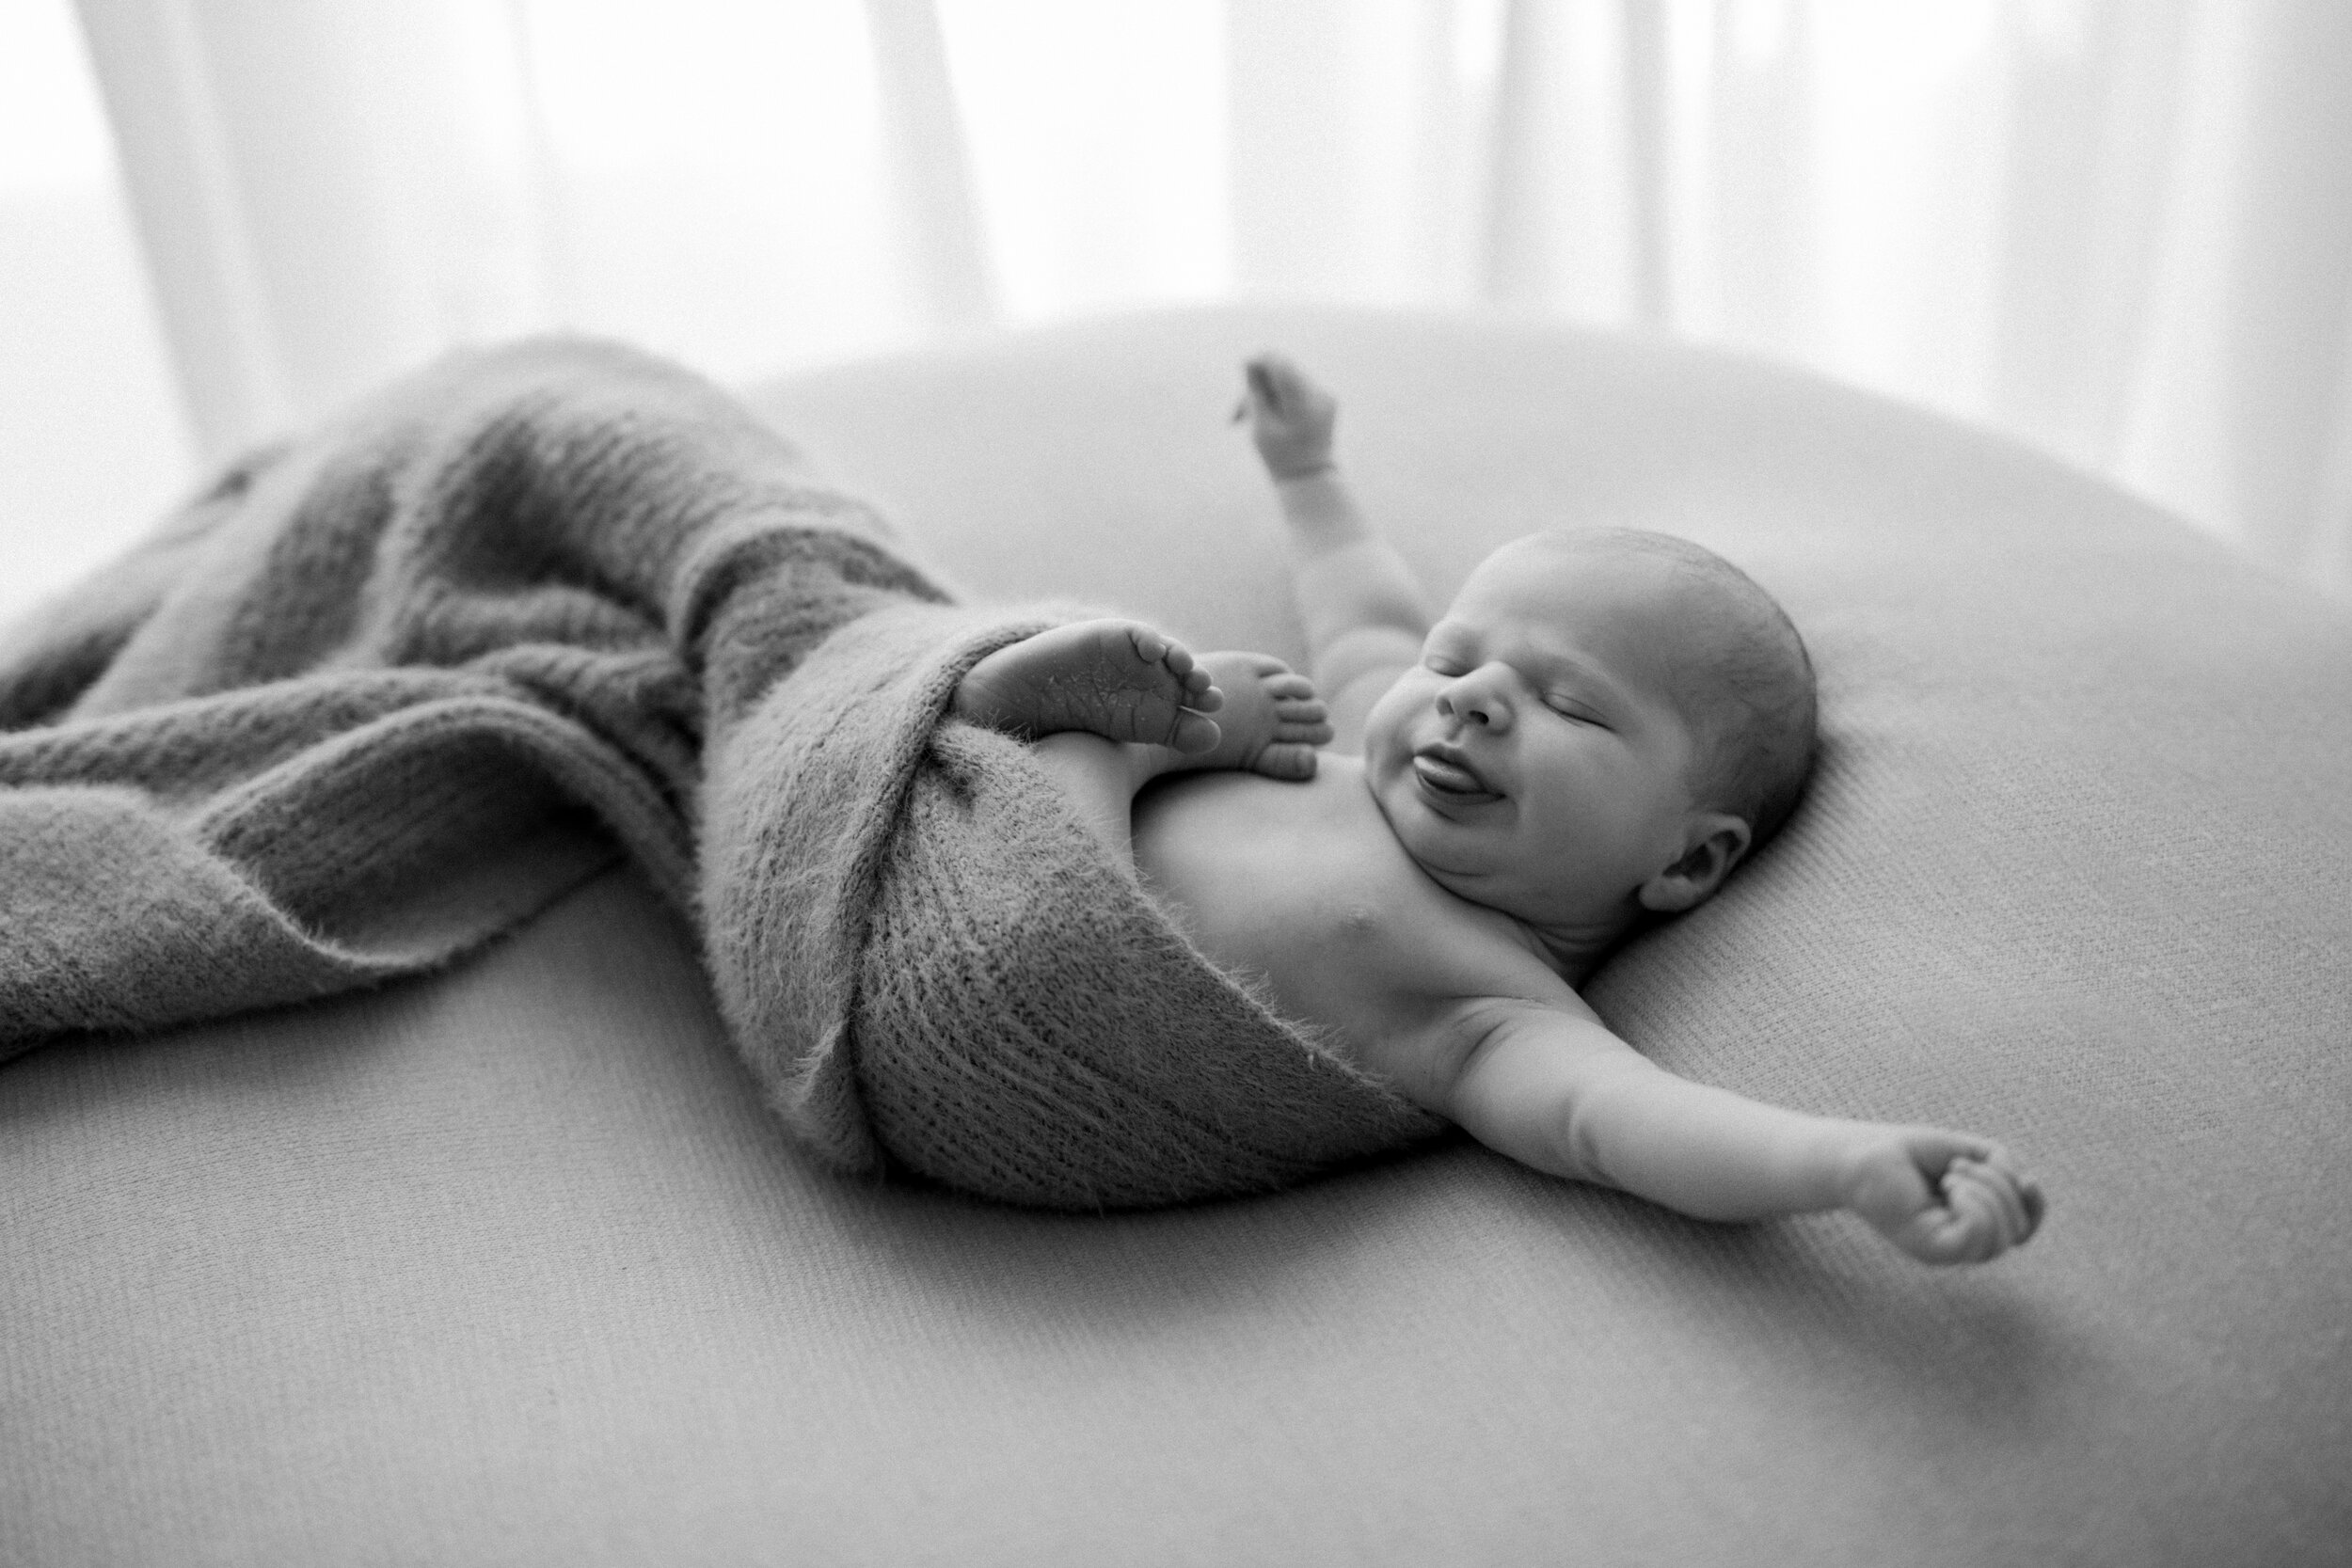 curled up newborn baby stretching it's arms